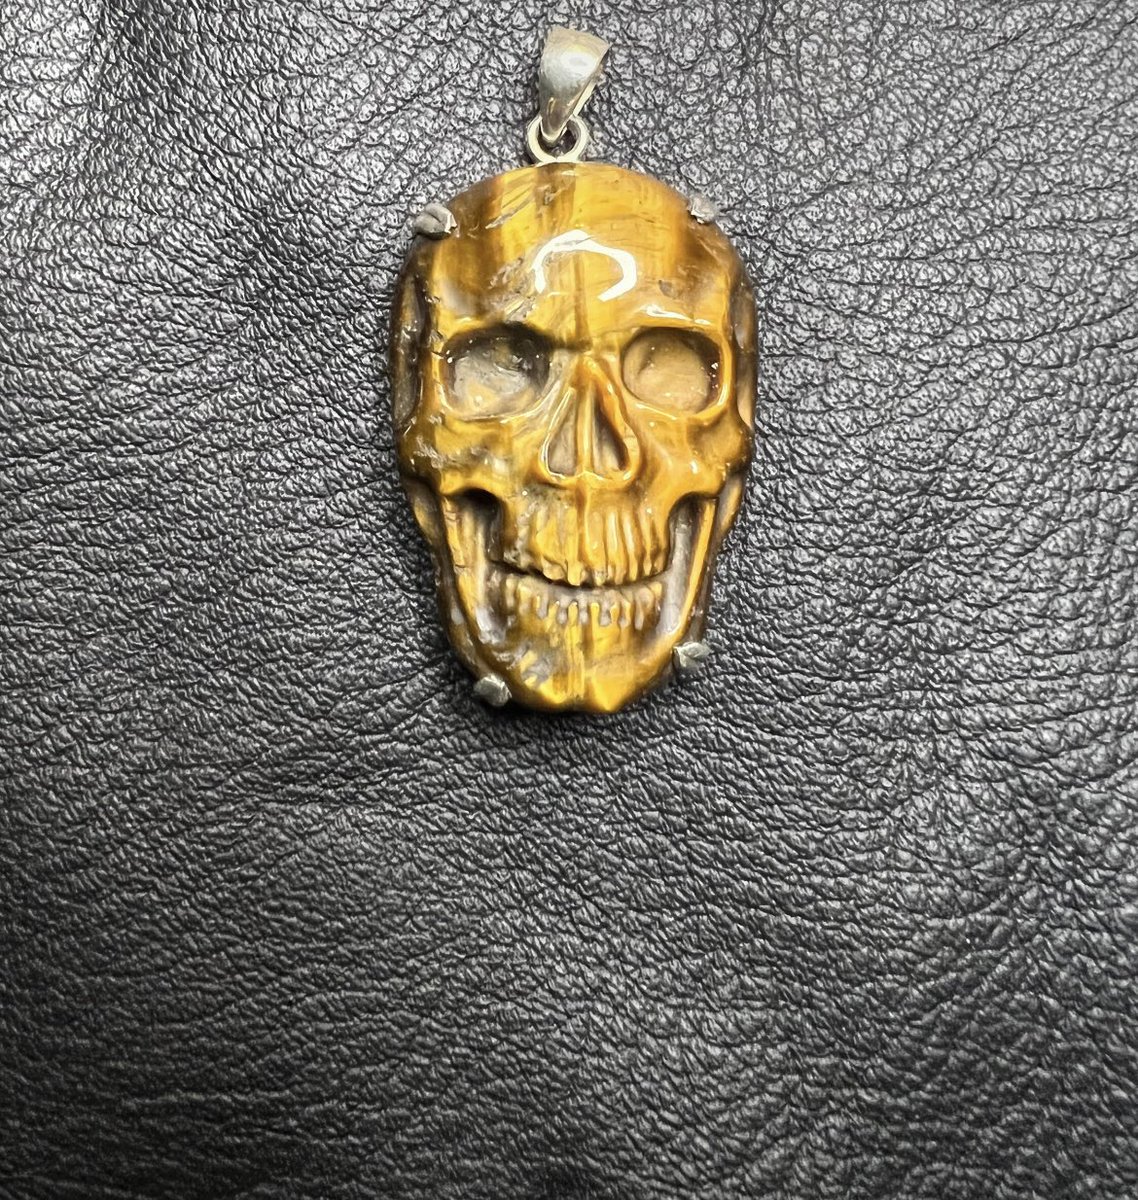 Making a list of possible embellishments for my Viking tiger sword project, this is $69.99 it’s chatoyant gemstone aka Tiger eye in the shape of a skull 💀 🤷‍♂️⚔️🕺 possible candidate as a jewel for my scabbard … get it Tiger eye 👁️ for Viking Tiger sword